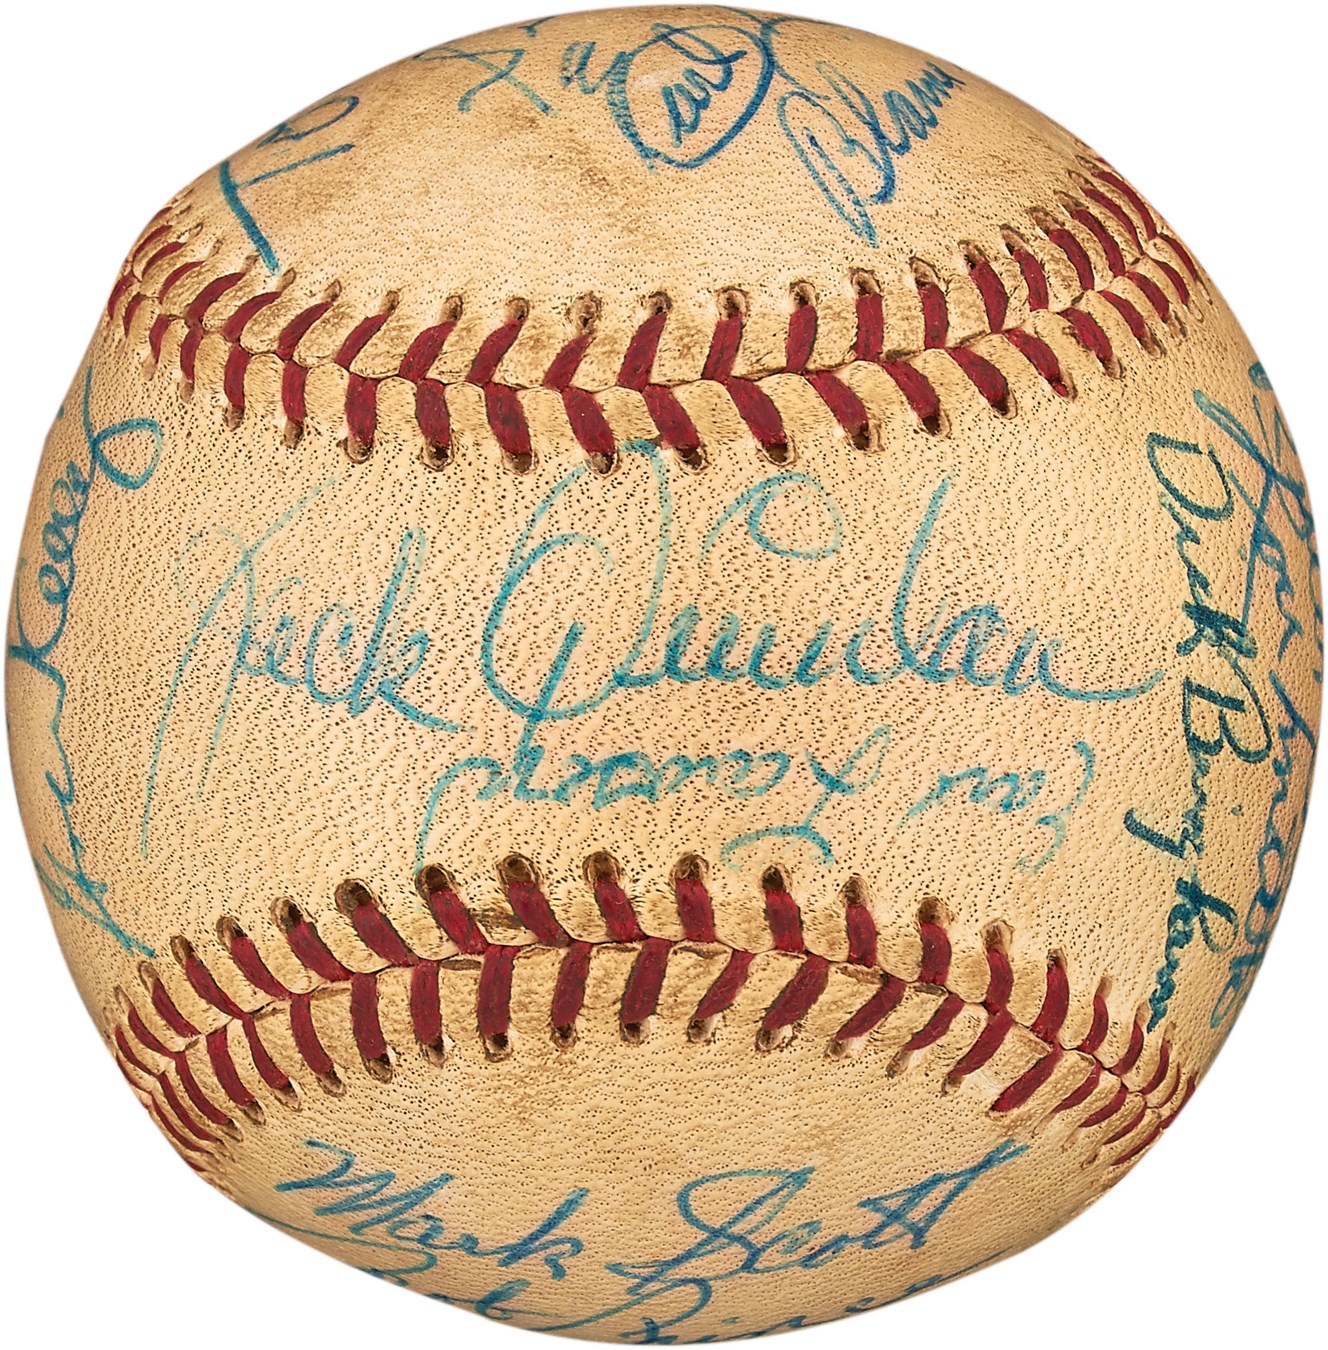 1950s Sportscasters and Sportswriters Signed Baseball